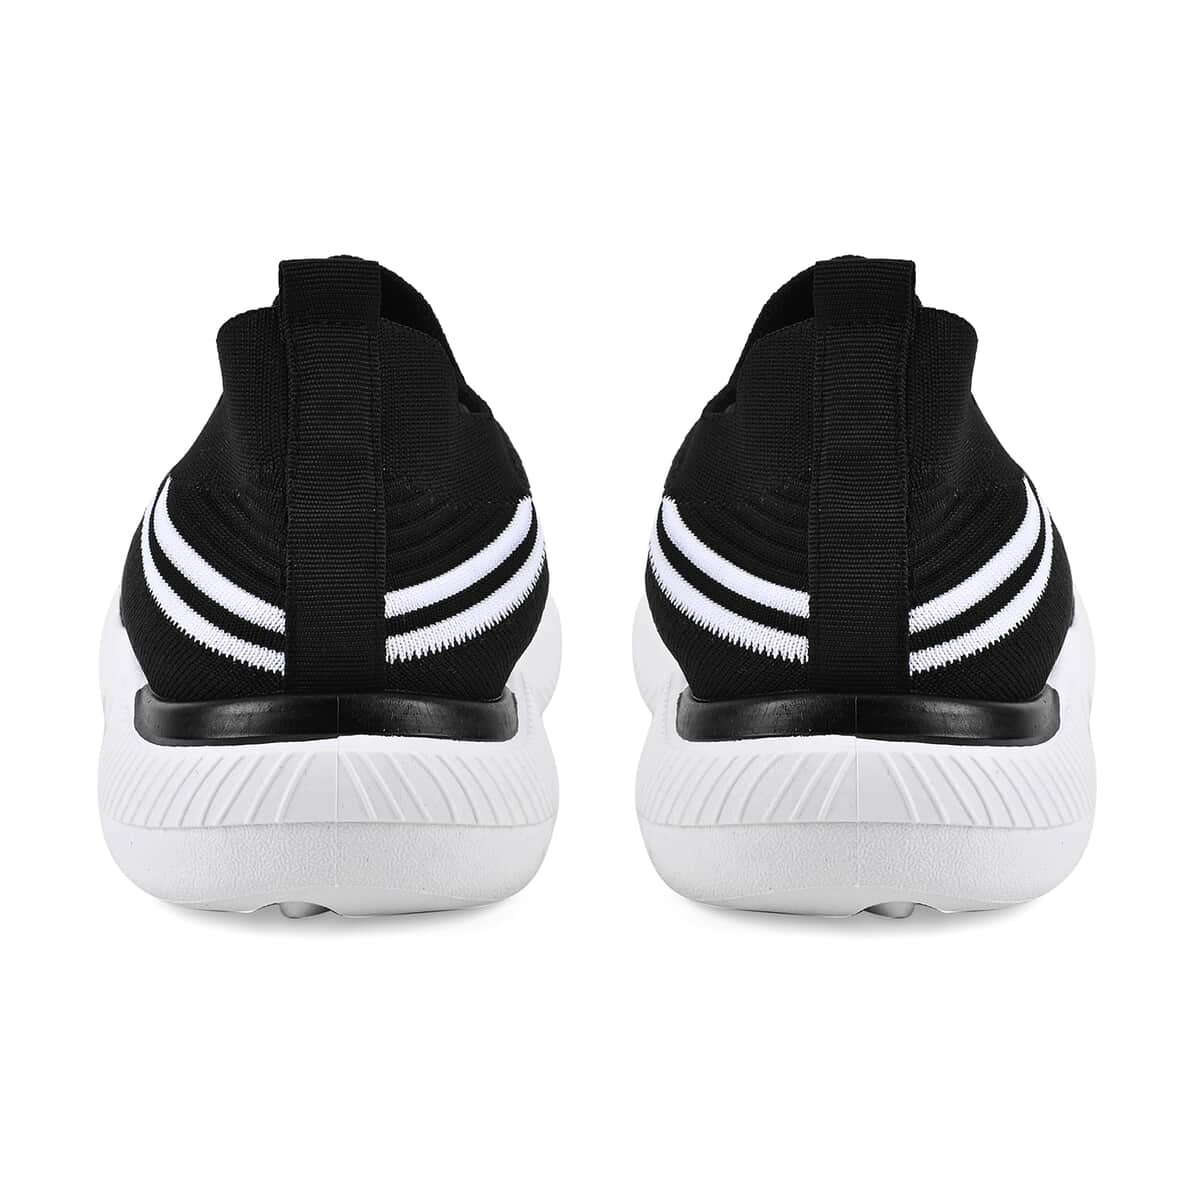 Black Comfortable Lightweight Slip-On Women Trainers Shoes With Breathable Knit Vent Non-Slip PVC Sole, All Day Casual Wear Stylish Sneakers (Size 7-7.5 / 39) image number 3